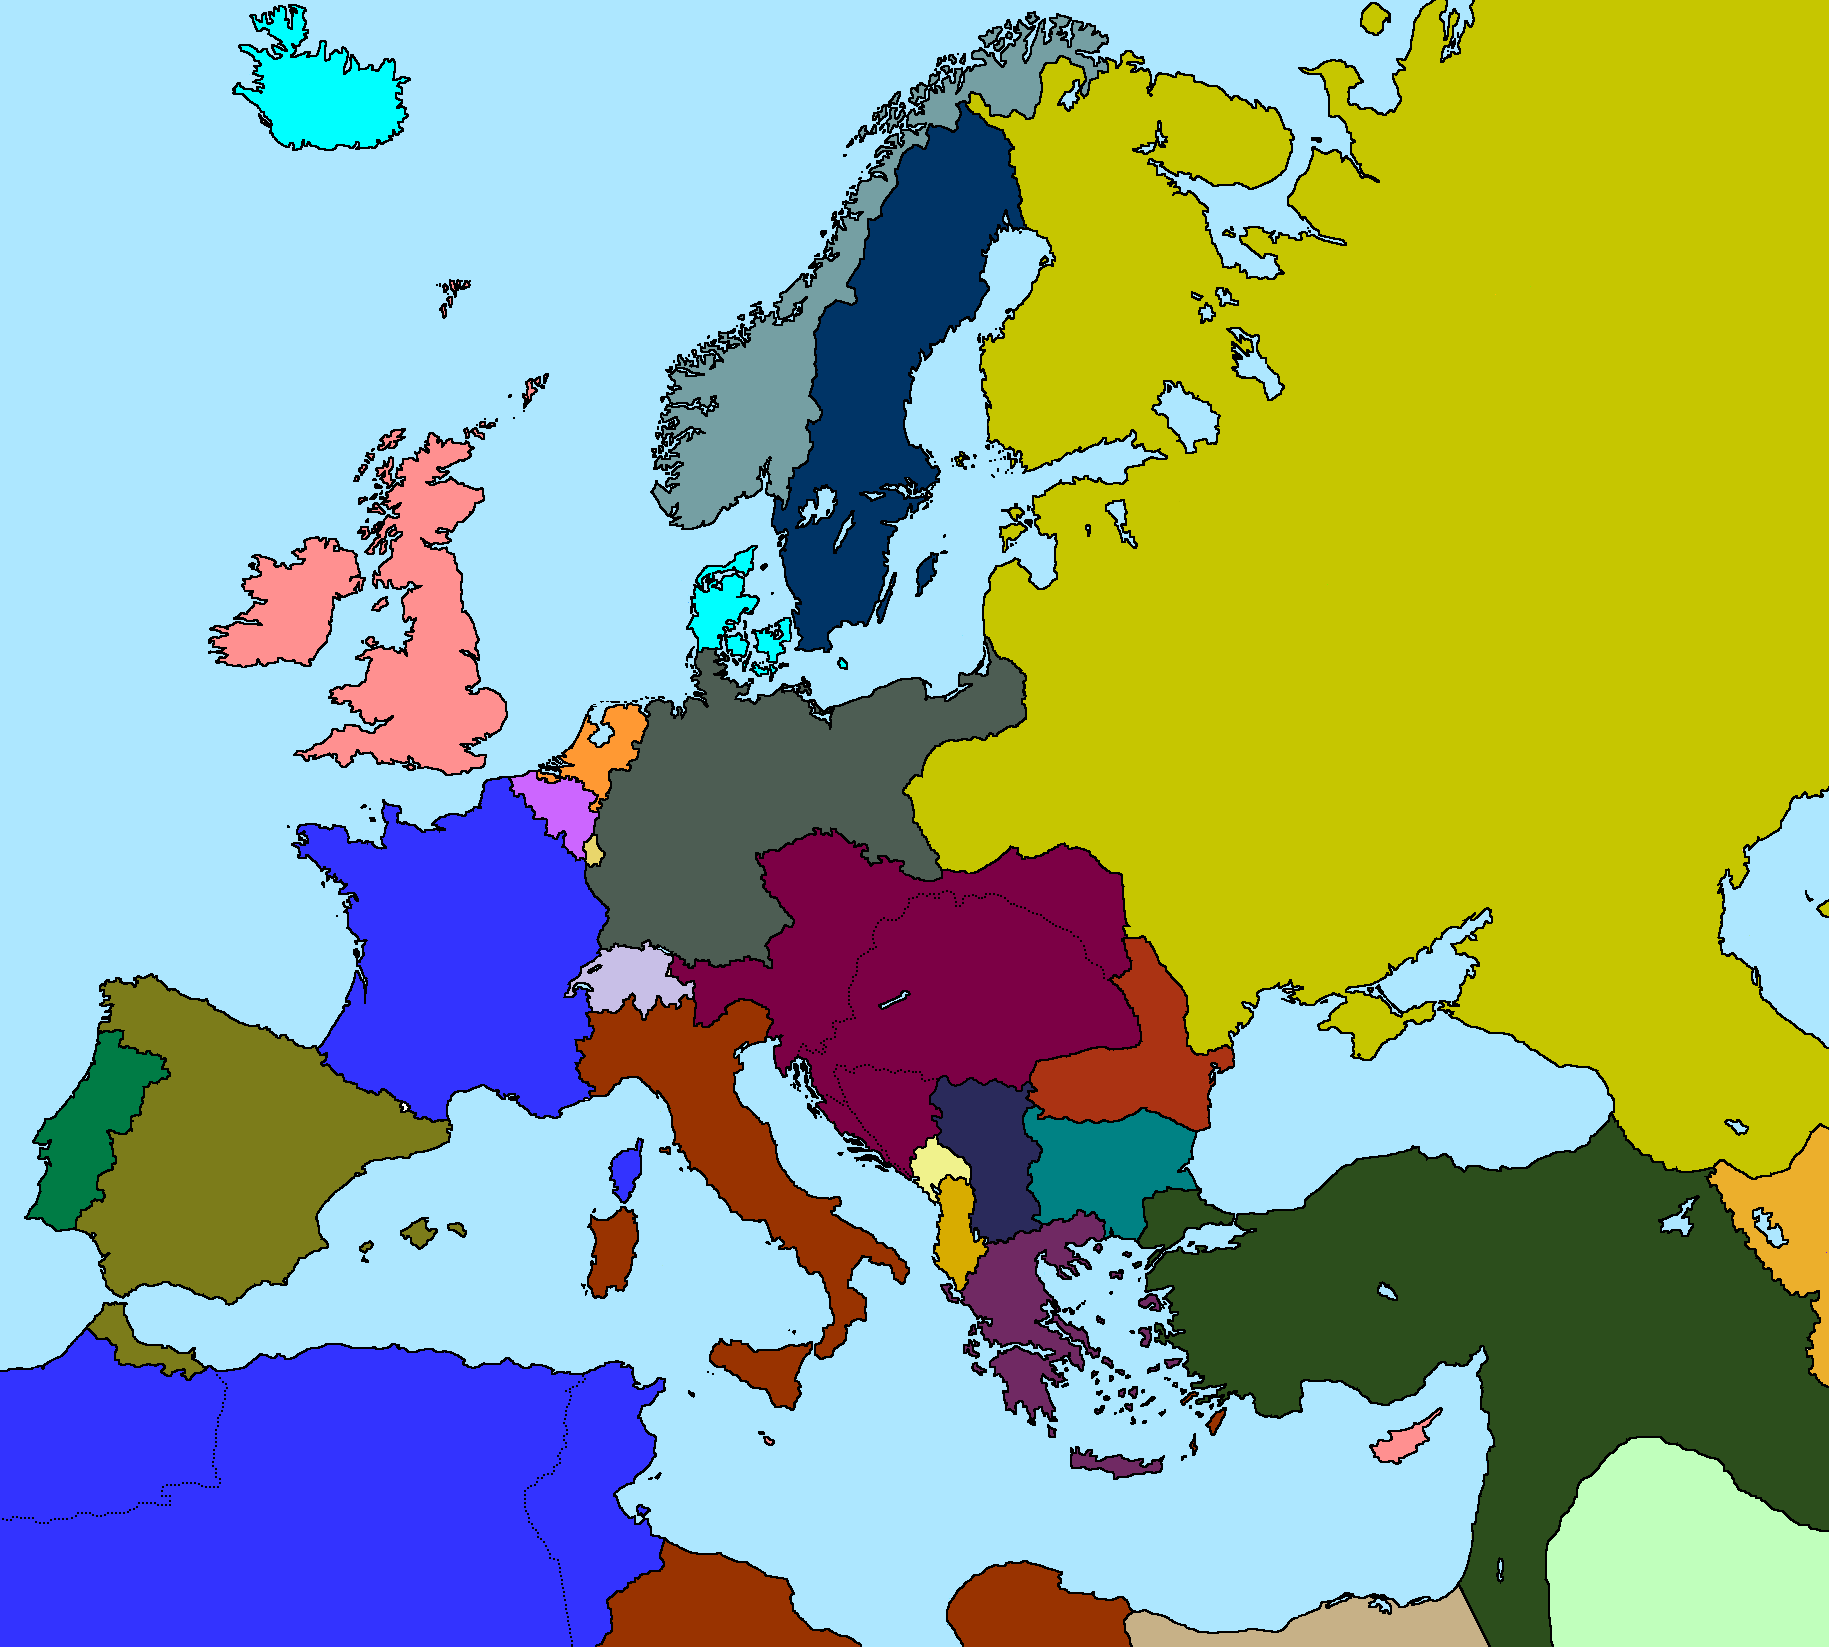 map_of_europe_1914_by_xgeograd-d9ibz4y.png